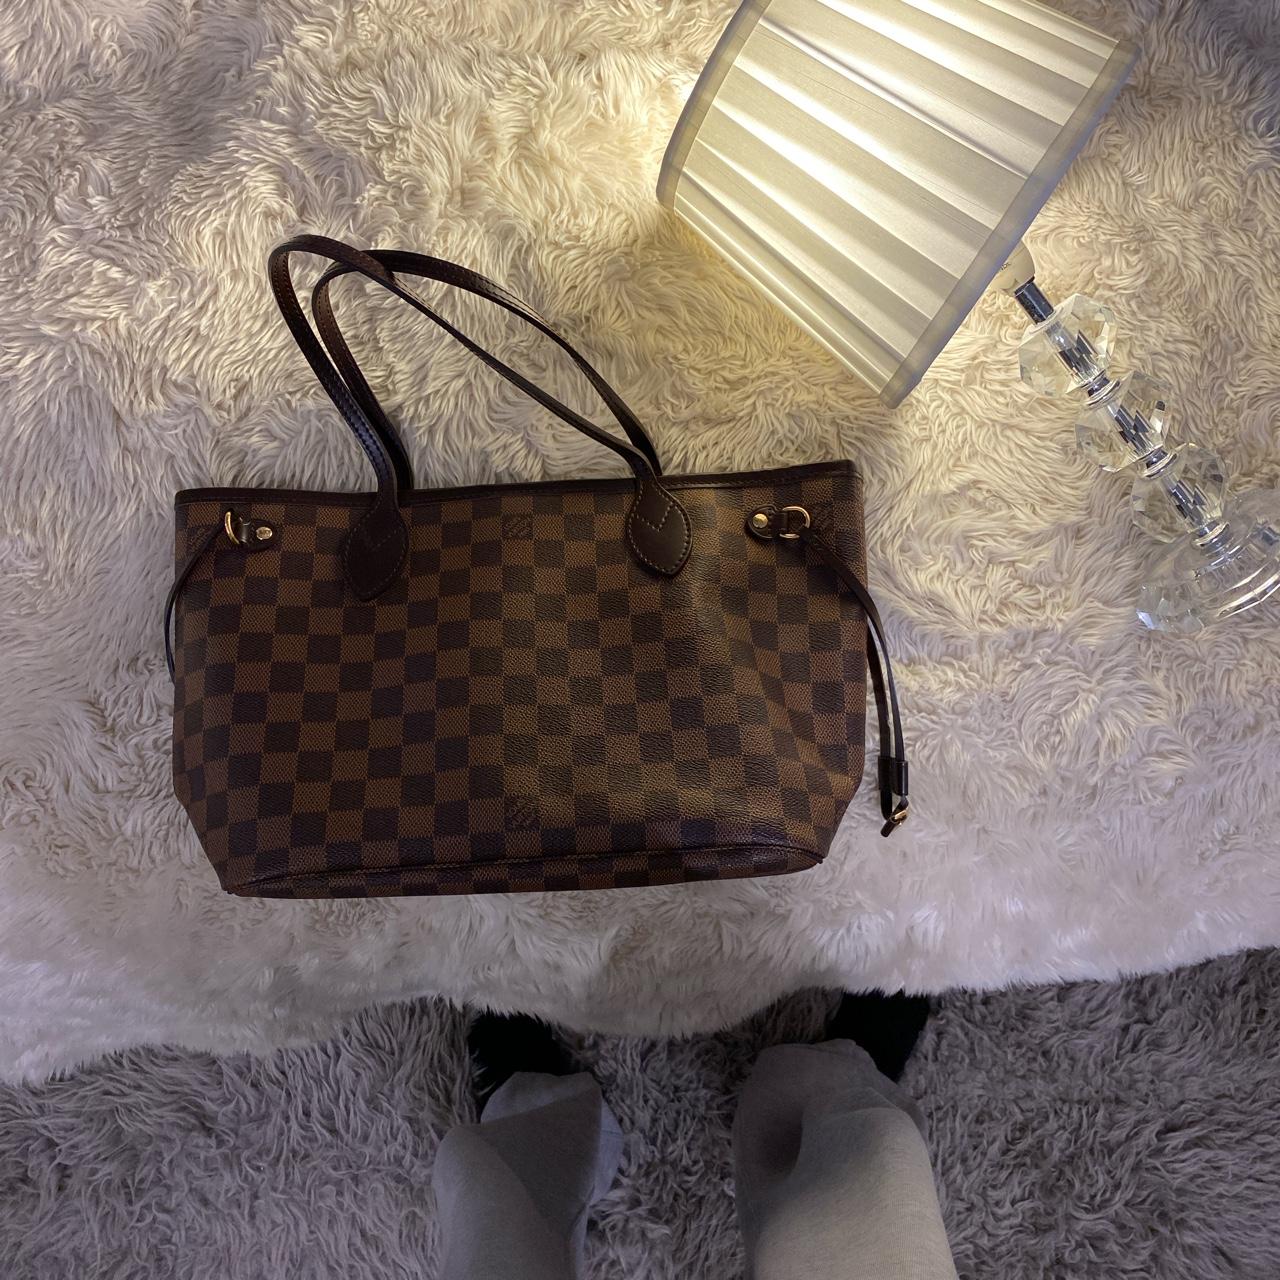 Louis Vuitton NEVERFULL PM TOTE BAG. Has been used - Depop